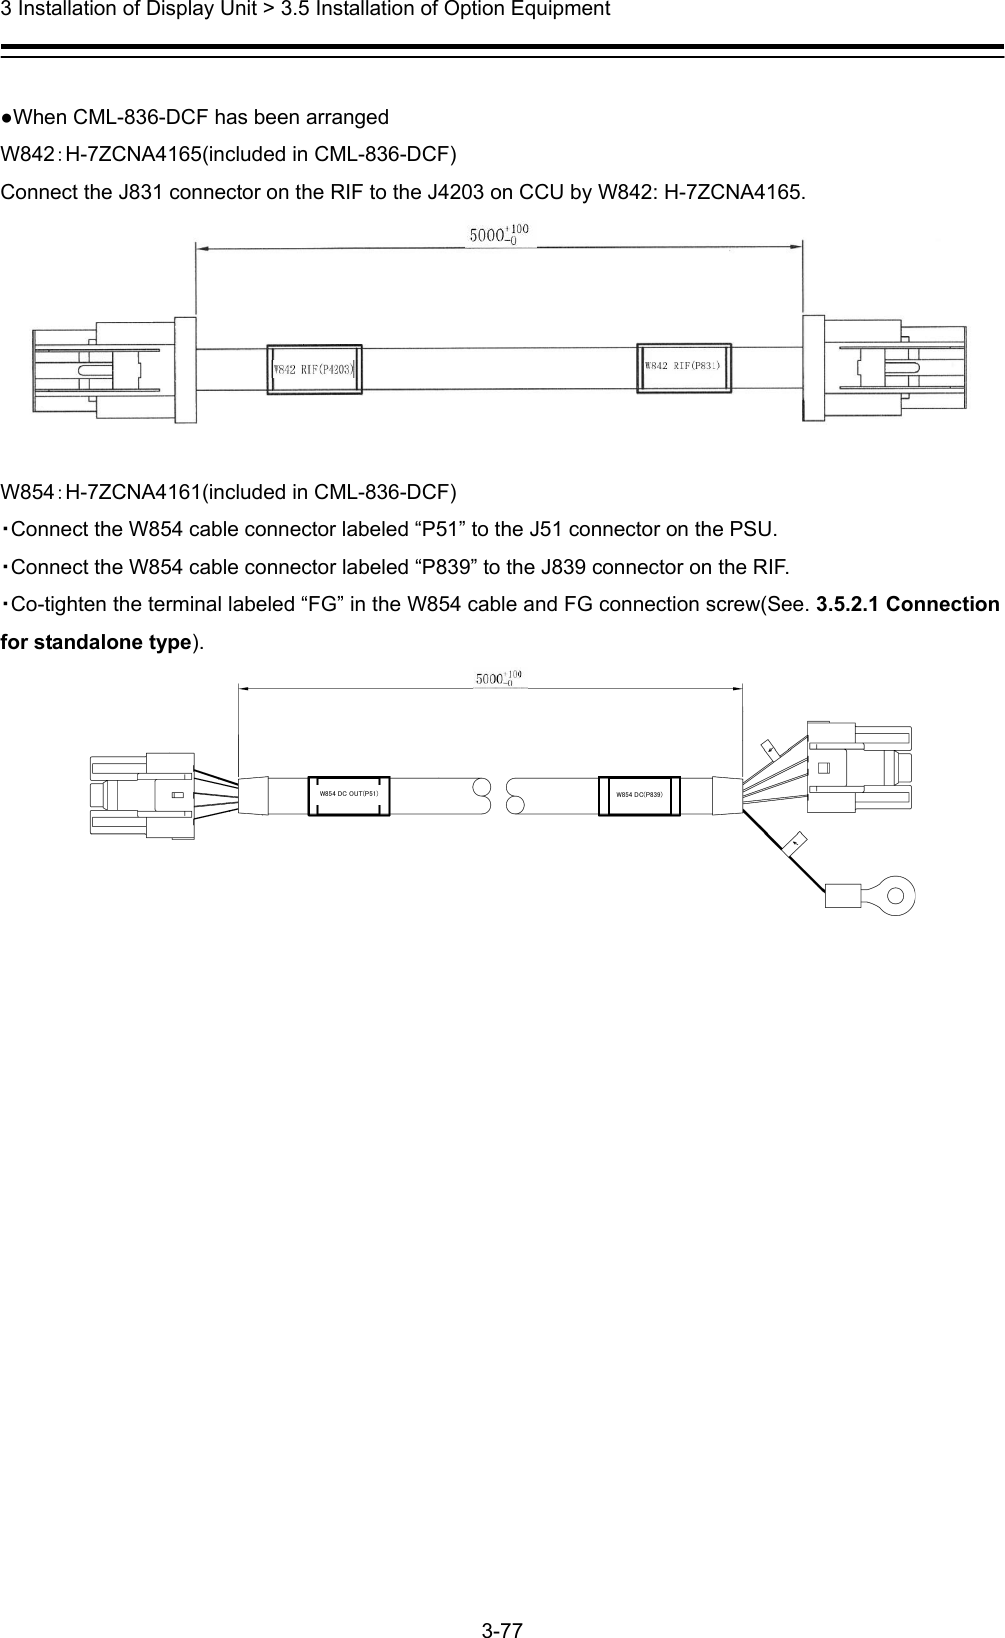  3 Installation of Display Unit &gt; 3.5 Installation of Option Equipment 3-77   ●When CML-836-DCF has been arranged   W842：H-7ZCNA4165(included in CML-836-DCF) Connect the J831 connector on the RIF to the J4203 on CCU by W842: H-7ZCNA4165.   W854：H-7ZCNA4161(included in CML-836-DCF) ・Connect the W854 cable connector labeled “P51” to the J51 connector on the PSU. ・Connect the W854 cable connector labeled “P839” to the J839 connector on the RIF. ・Co-tighten the terminal labeled “FG” in the W854 cable and FG connection screw(See. 3.5.2.1 Connection for standalone type). W854 DC OUT(P51) W854 DC(P839)          